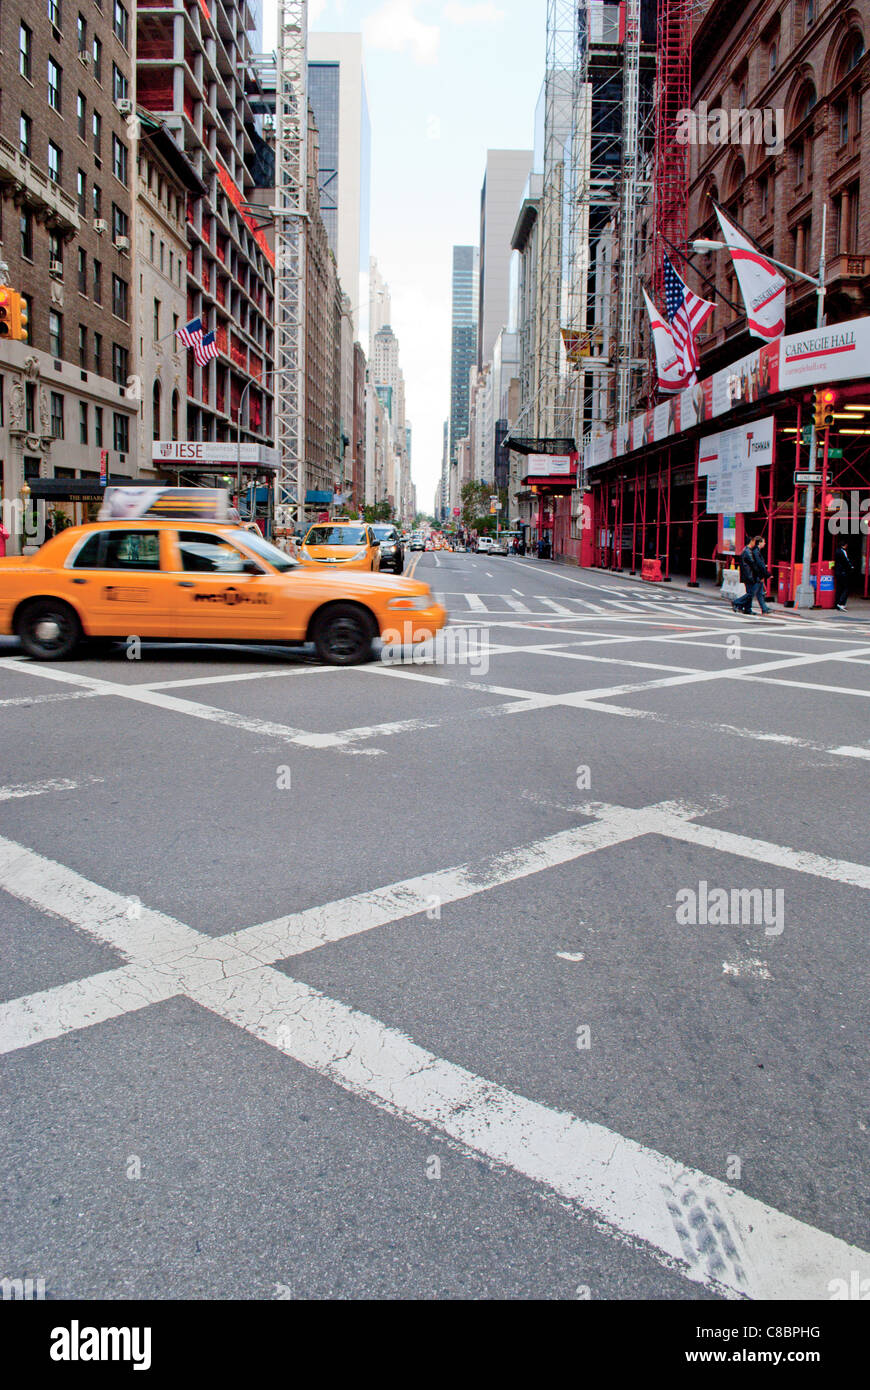 Street in New York city with a yellow cab. Stock Photo